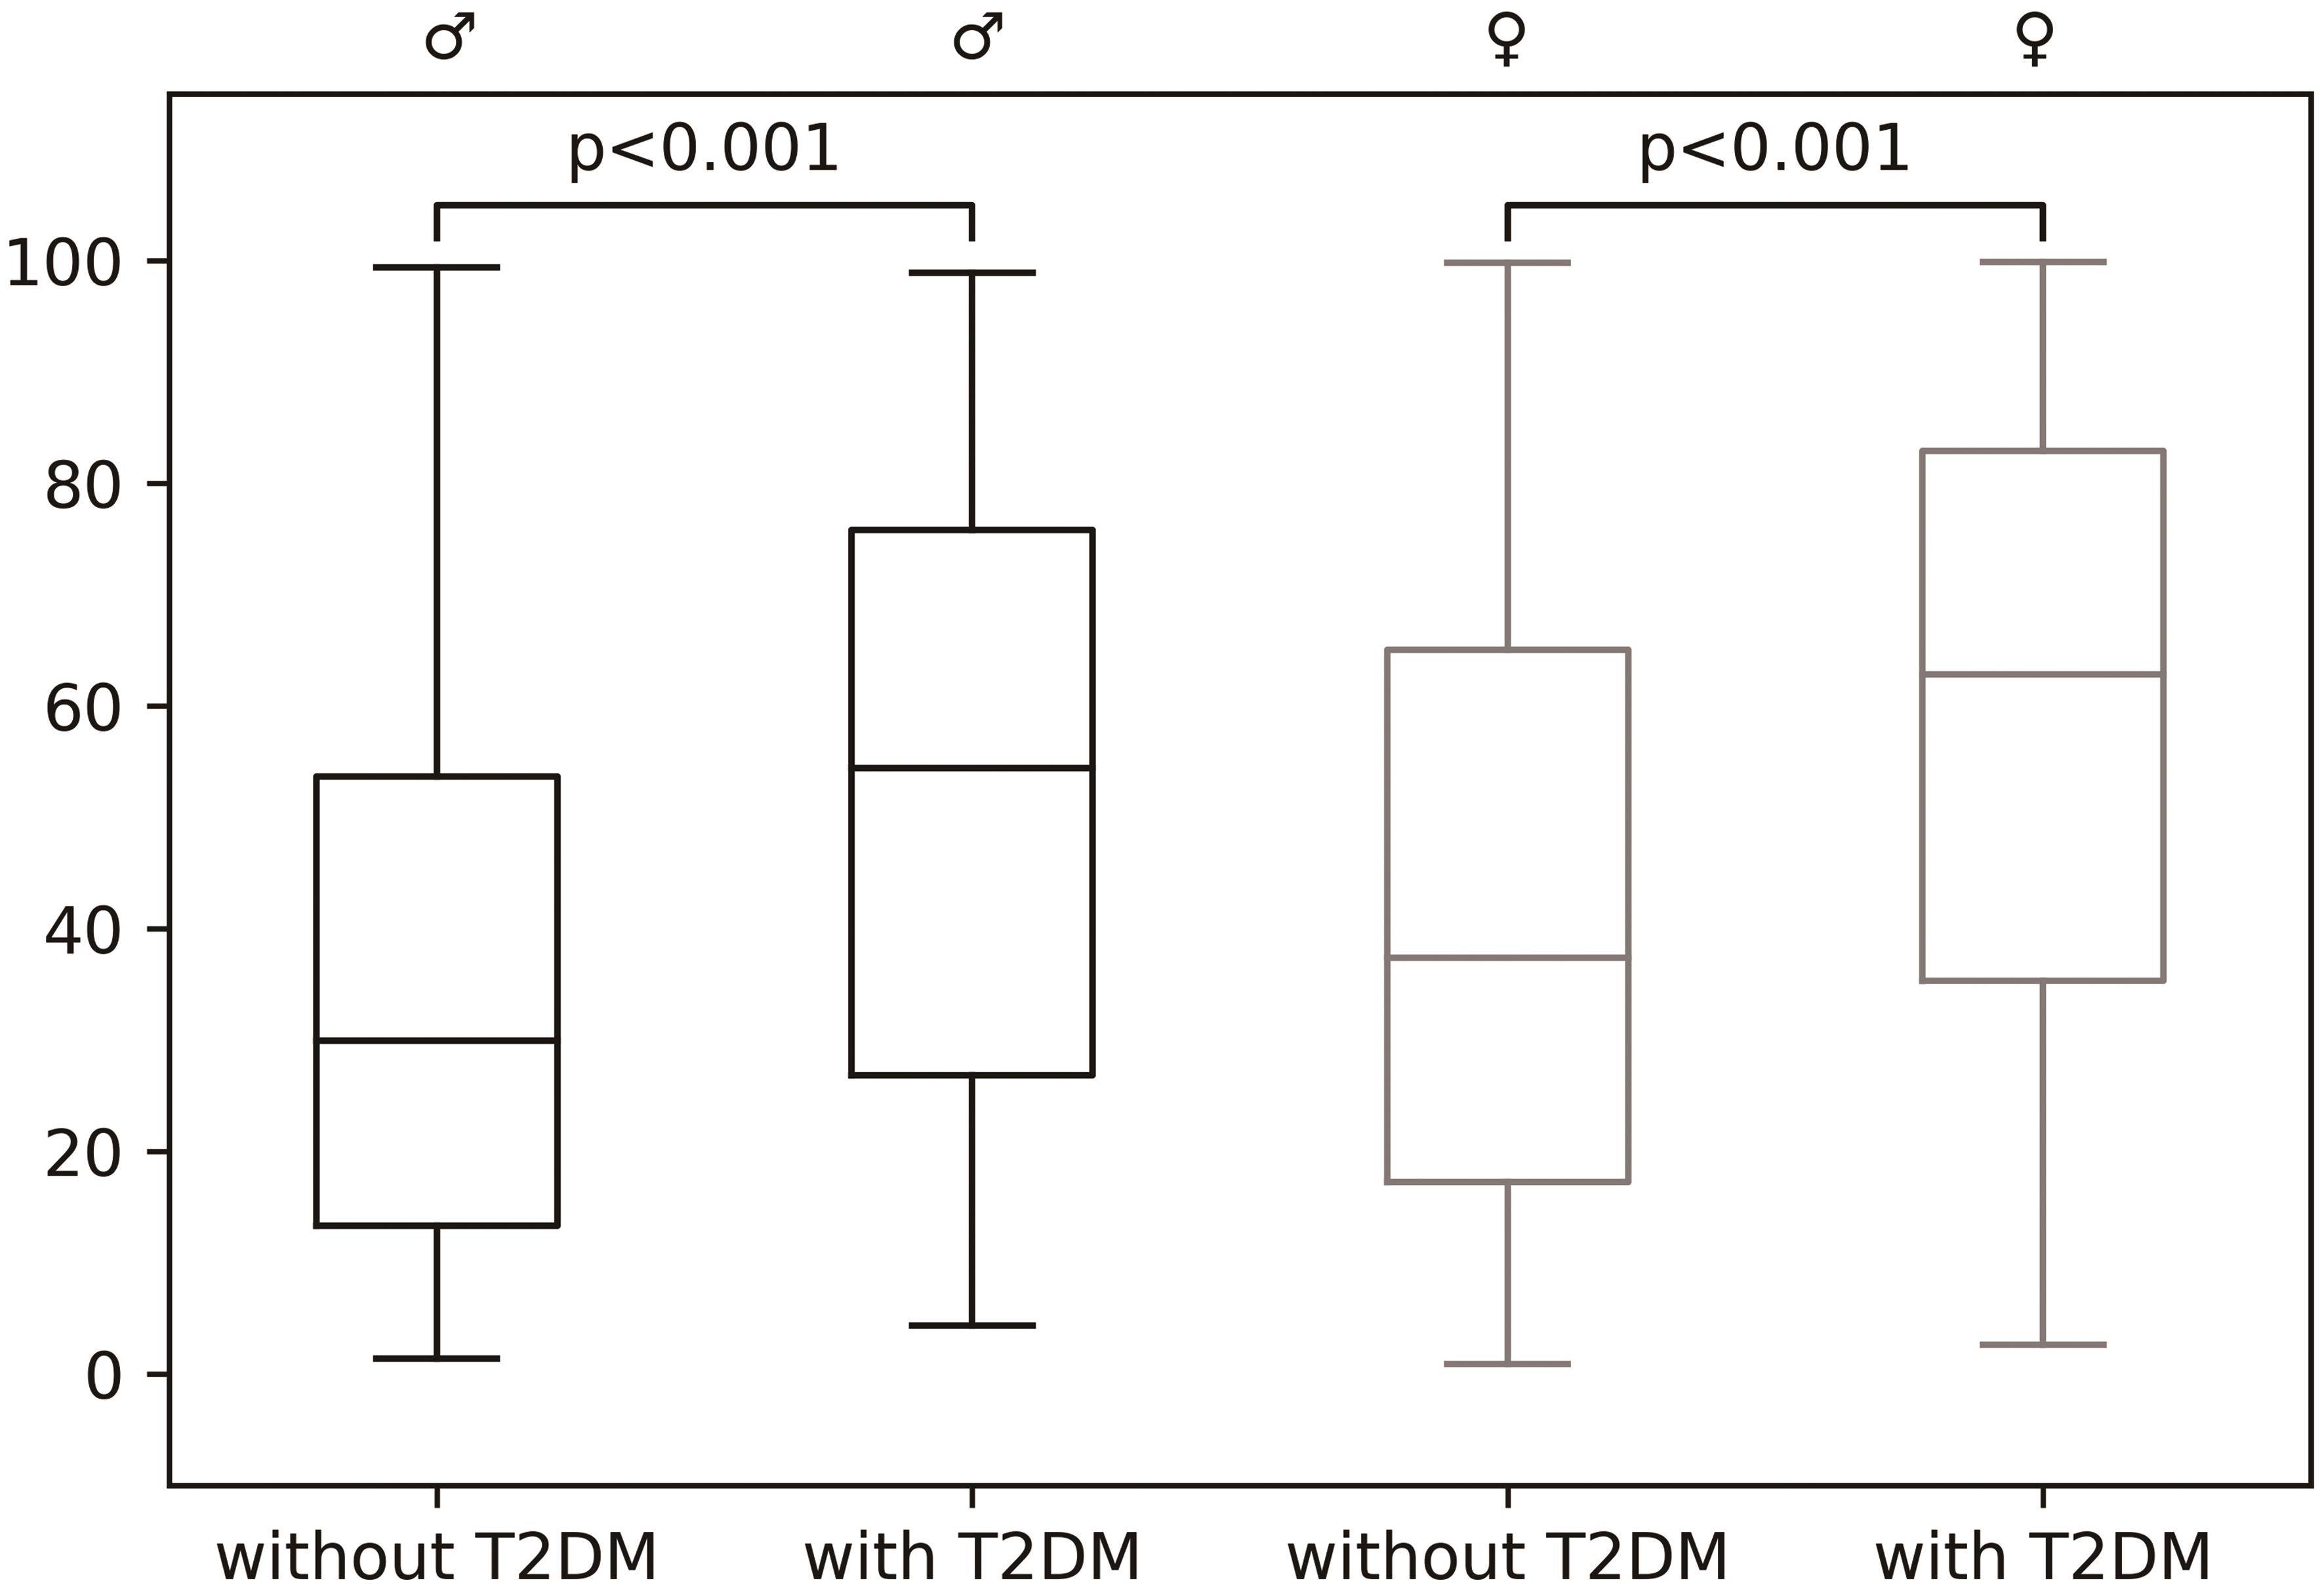 FLI in male (black) and female (grey) participants with and without T2DM.